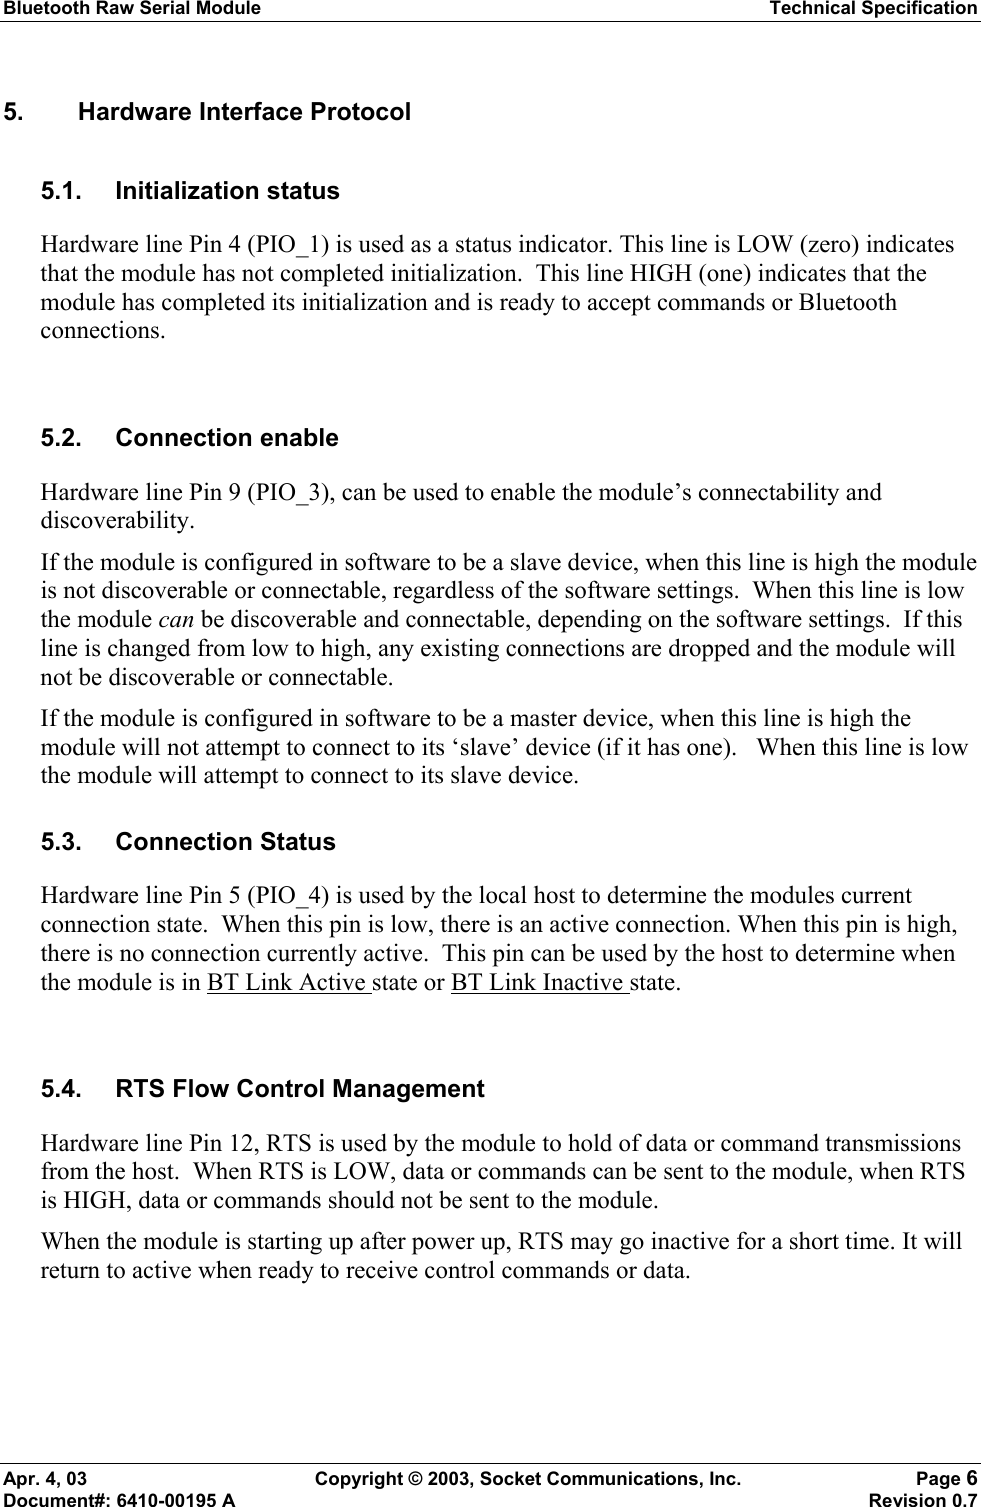 Bluetooth Raw Serial Module Technical Specification Apr. 4, 03  Copyright © 2003, Socket Communications, Inc.  Page 6 Document#: 6410-00195 A    Revision 0.7 5.  Hardware Interface Protocol 5.1. Initialization status Hardware line Pin 4 (PIO_1) is used as a status indicator. This line is LOW (zero) indicates that the module has not completed initialization.  This line HIGH (one) indicates that the module has completed its initialization and is ready to accept commands or Bluetooth connections.    5.2. Connection enable Hardware line Pin 9 (PIO_3), can be used to enable the module’s connectability and discoverability.   If the module is configured in software to be a slave device, when this line is high the module is not discoverable or connectable, regardless of the software settings.  When this line is low the module can be discoverable and connectable, depending on the software settings.  If this line is changed from low to high, any existing connections are dropped and the module will not be discoverable or connectable. If the module is configured in software to be a master device, when this line is high the module will not attempt to connect to its ‘slave’ device (if it has one).   When this line is low the module will attempt to connect to its slave device. 5.3. Connection Status Hardware line Pin 5 (PIO_4) is used by the local host to determine the modules current connection state.  When this pin is low, there is an active connection. When this pin is high, there is no connection currently active.  This pin can be used by the host to determine when the module is in BT Link Active state or BT Link Inactive state.  5.4.  RTS Flow Control Management Hardware line Pin 12, RTS is used by the module to hold of data or command transmissions from the host.  When RTS is LOW, data or commands can be sent to the module, when RTS is HIGH, data or commands should not be sent to the module.   When the module is starting up after power up, RTS may go inactive for a short time. It will return to active when ready to receive control commands or data.   